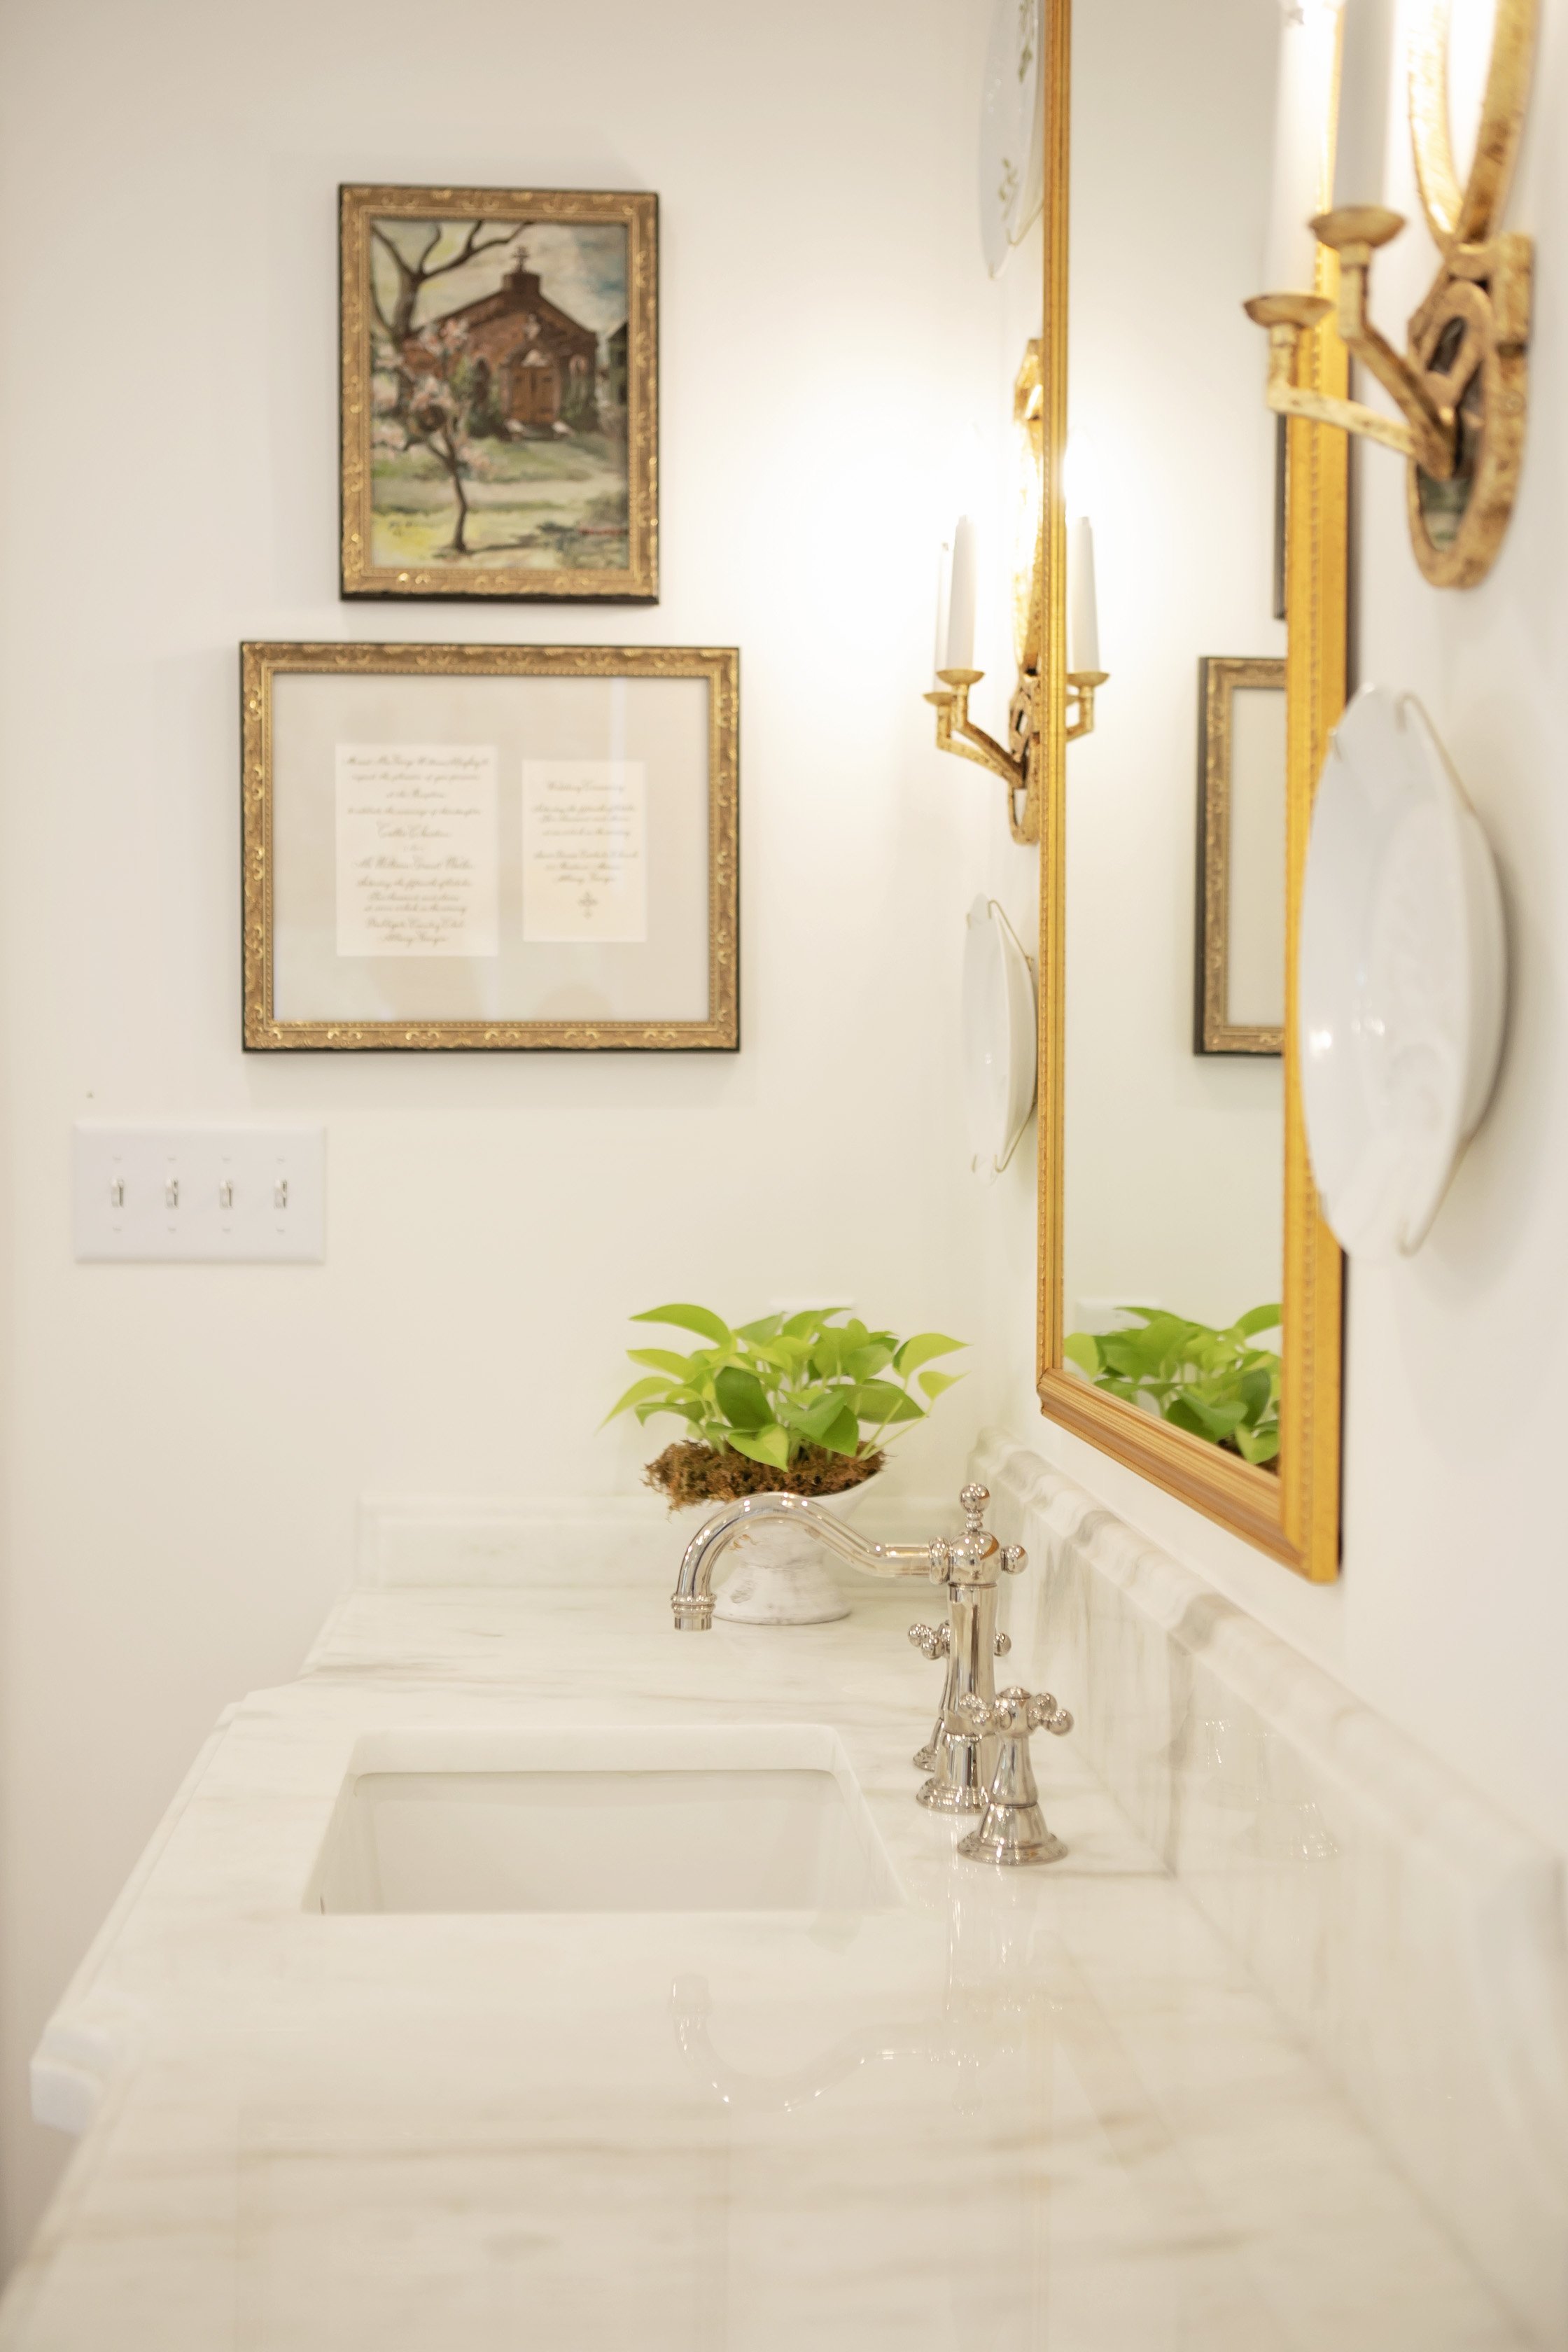 Mixed Metals: Polished Nickel Finishes in Master Bathroom _Gold Light Fixtures_Pool Brothers Bathroom Construction.jpg